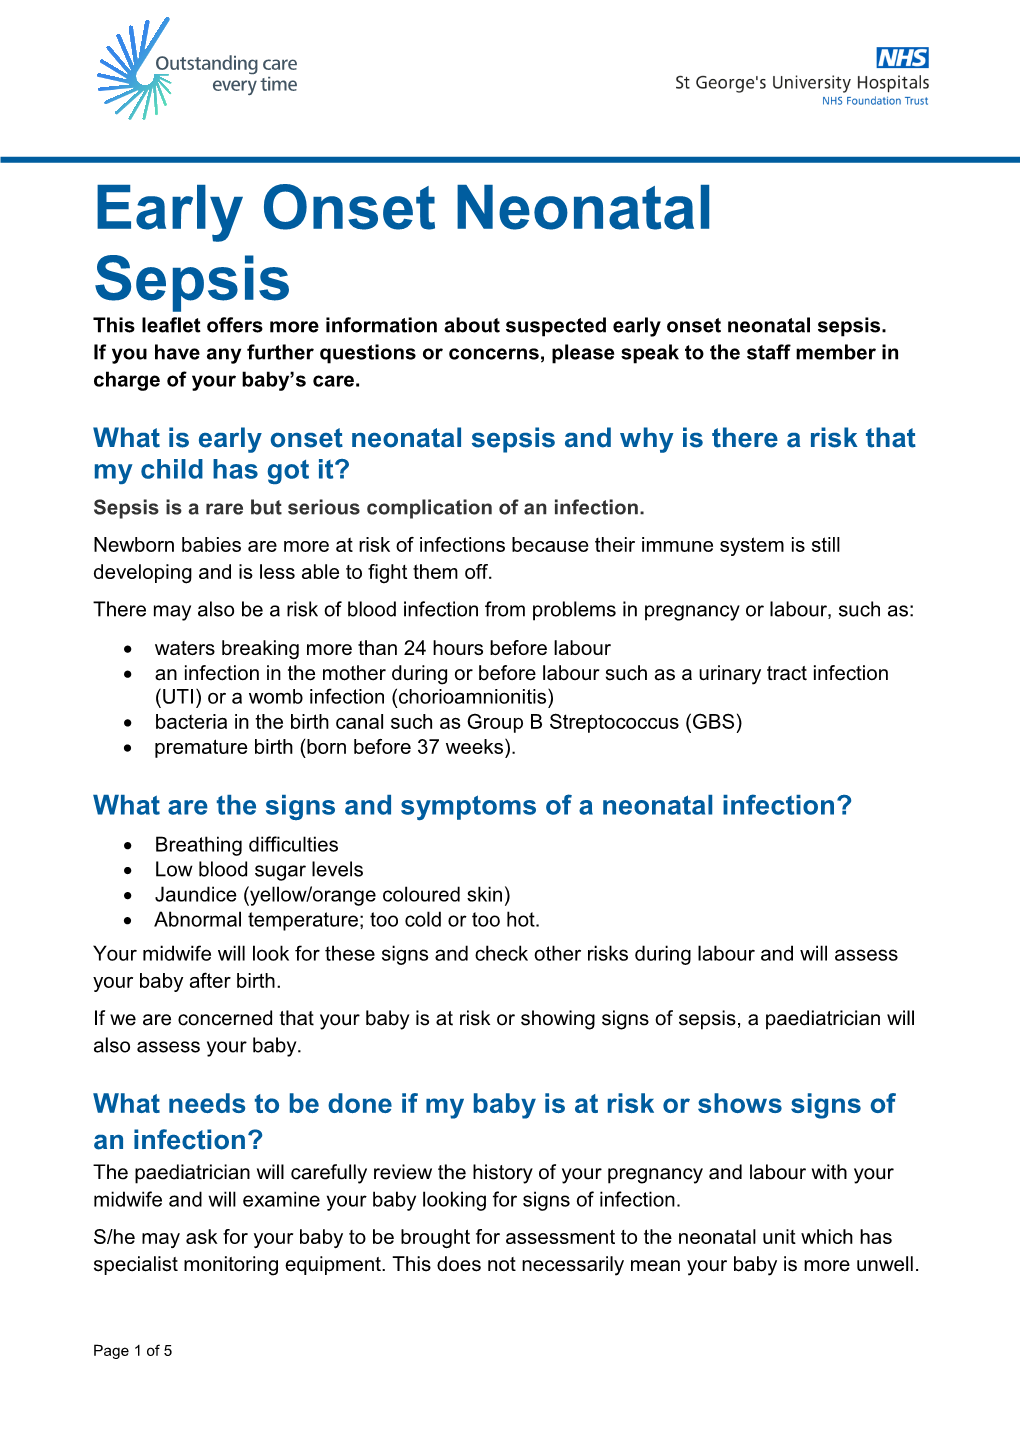 Early Onset Neonatal Sepsis This Leaflet Offers More Information About